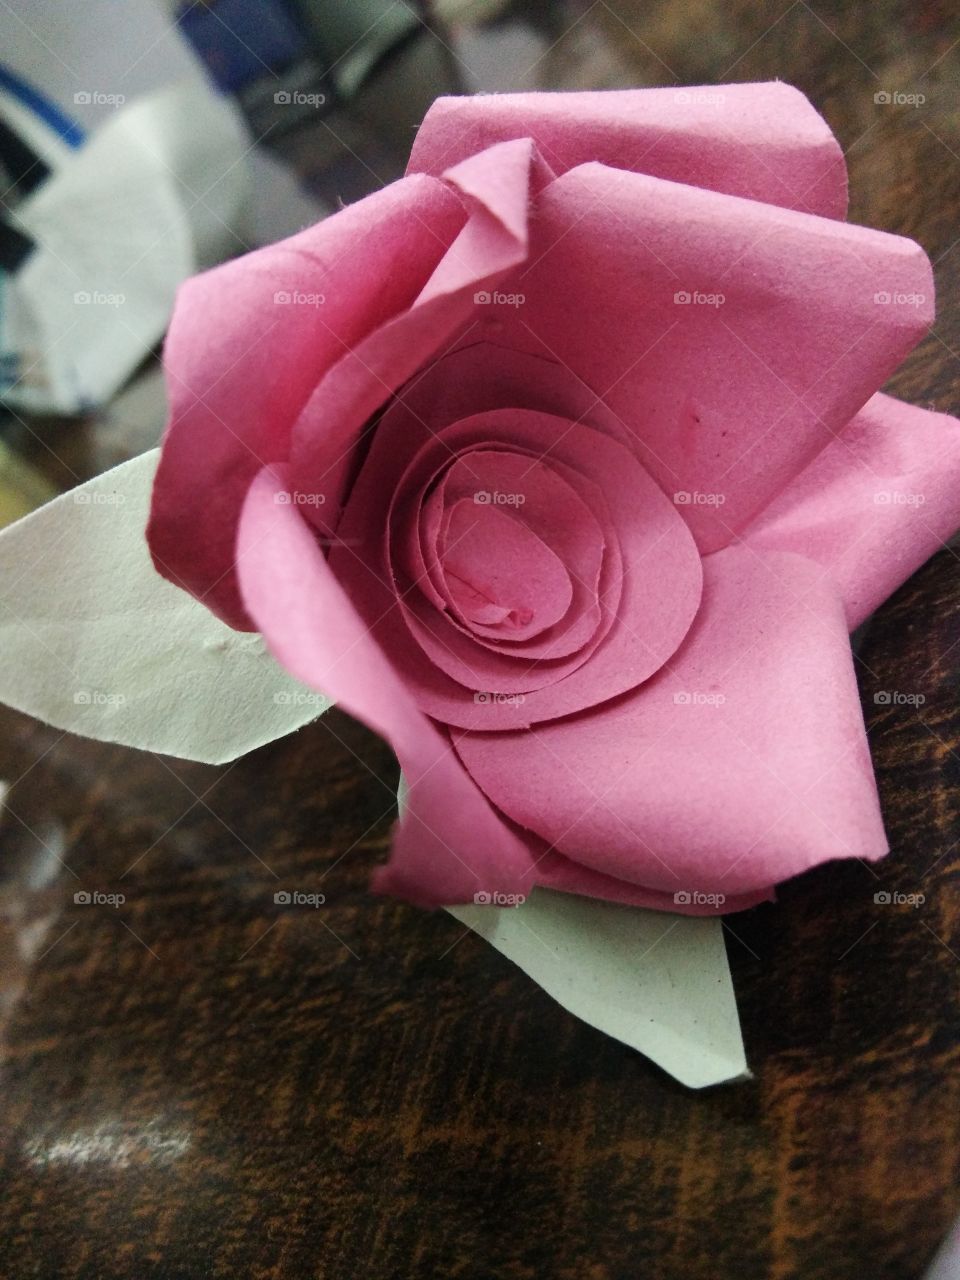 Hand made paper rose. Art at its best